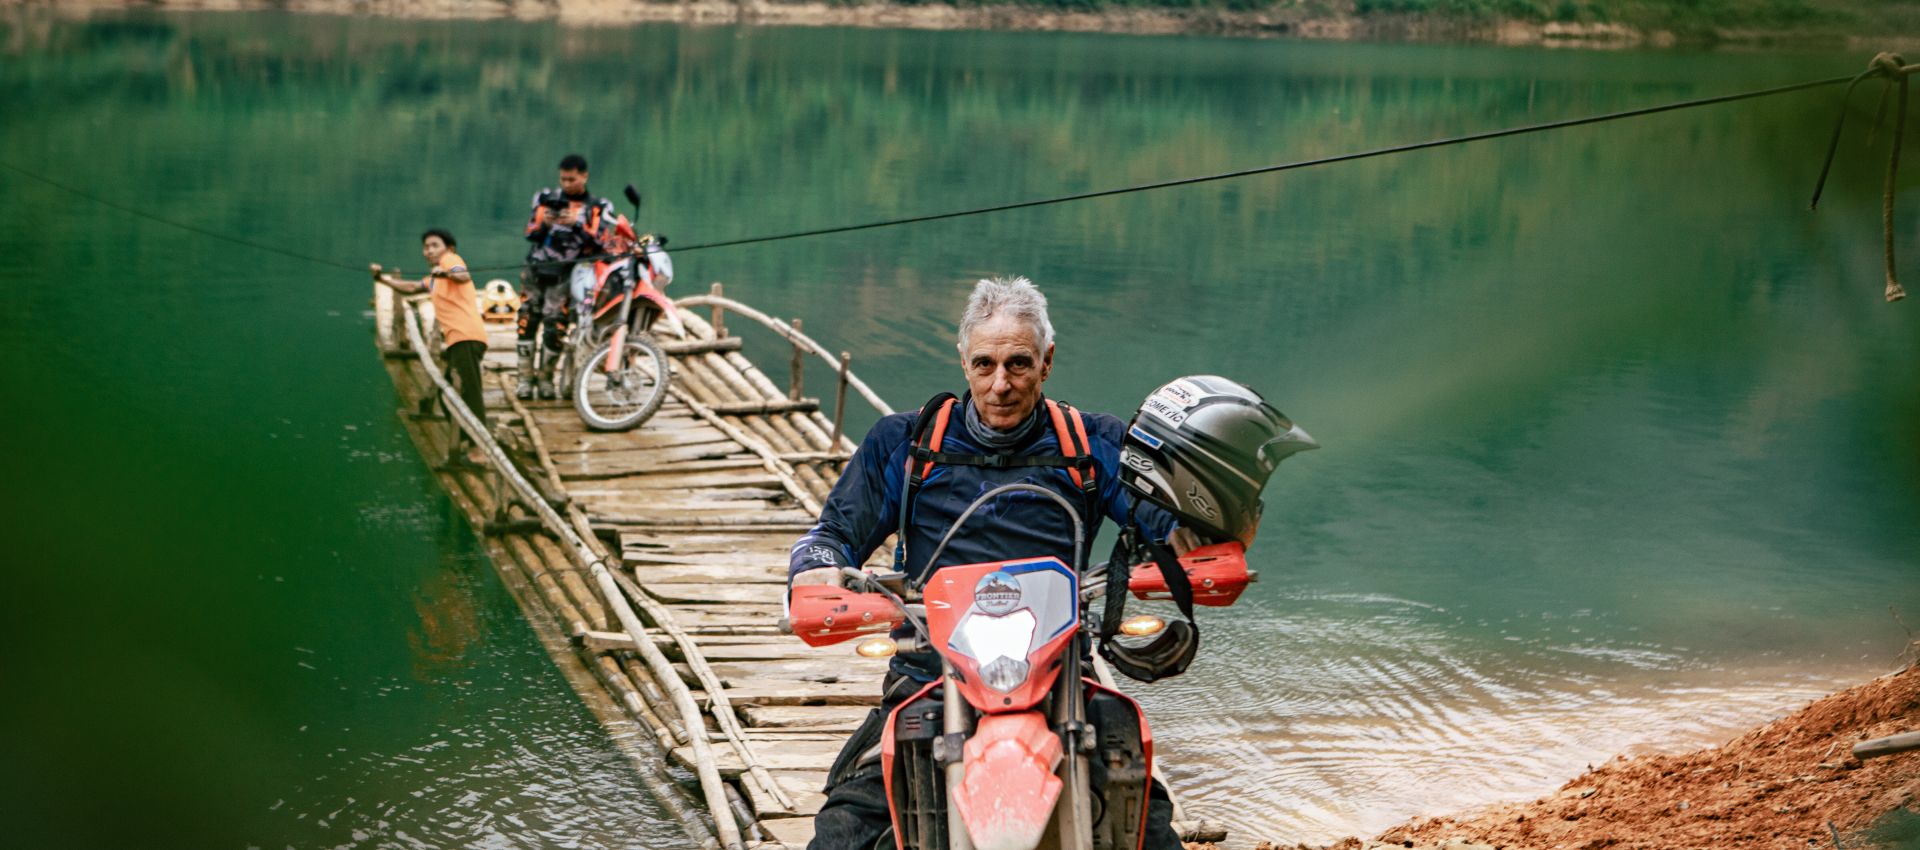 Riding The Clouds: A 8-Day Epic Motorcycle Odyssey Through The Enchanting Northwest Highlands Of Vietnam